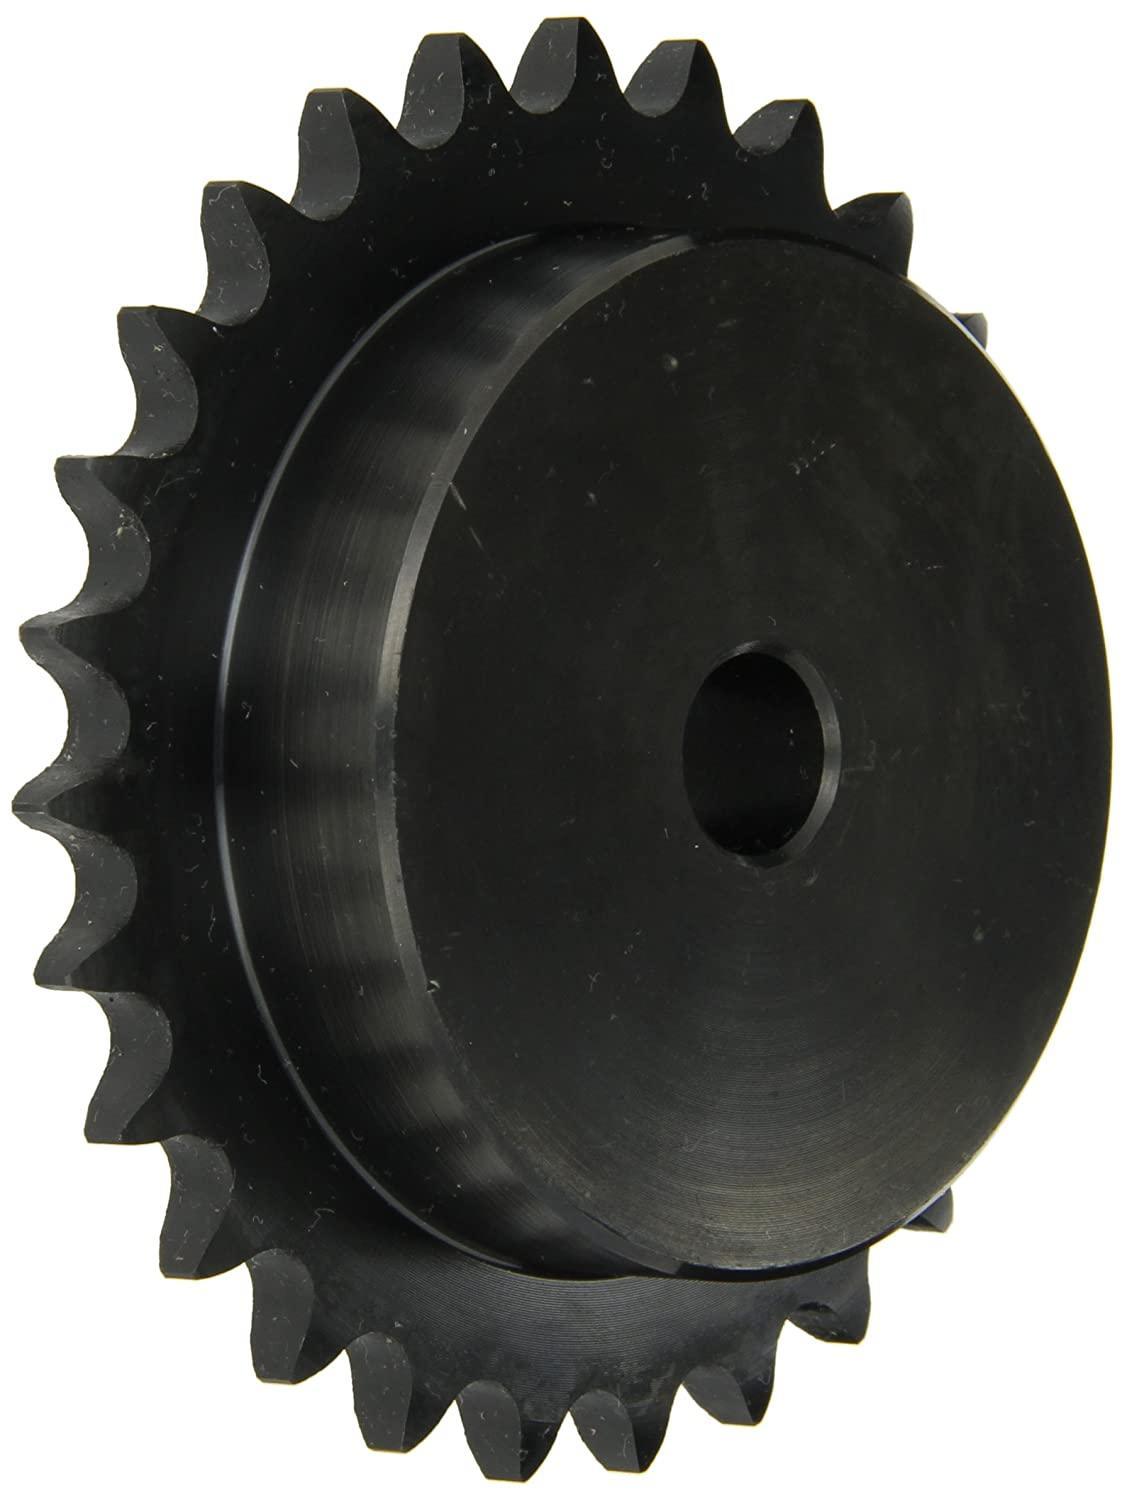 100B35 Roller Chain Sprocket With Stock Bore - Forces Inc